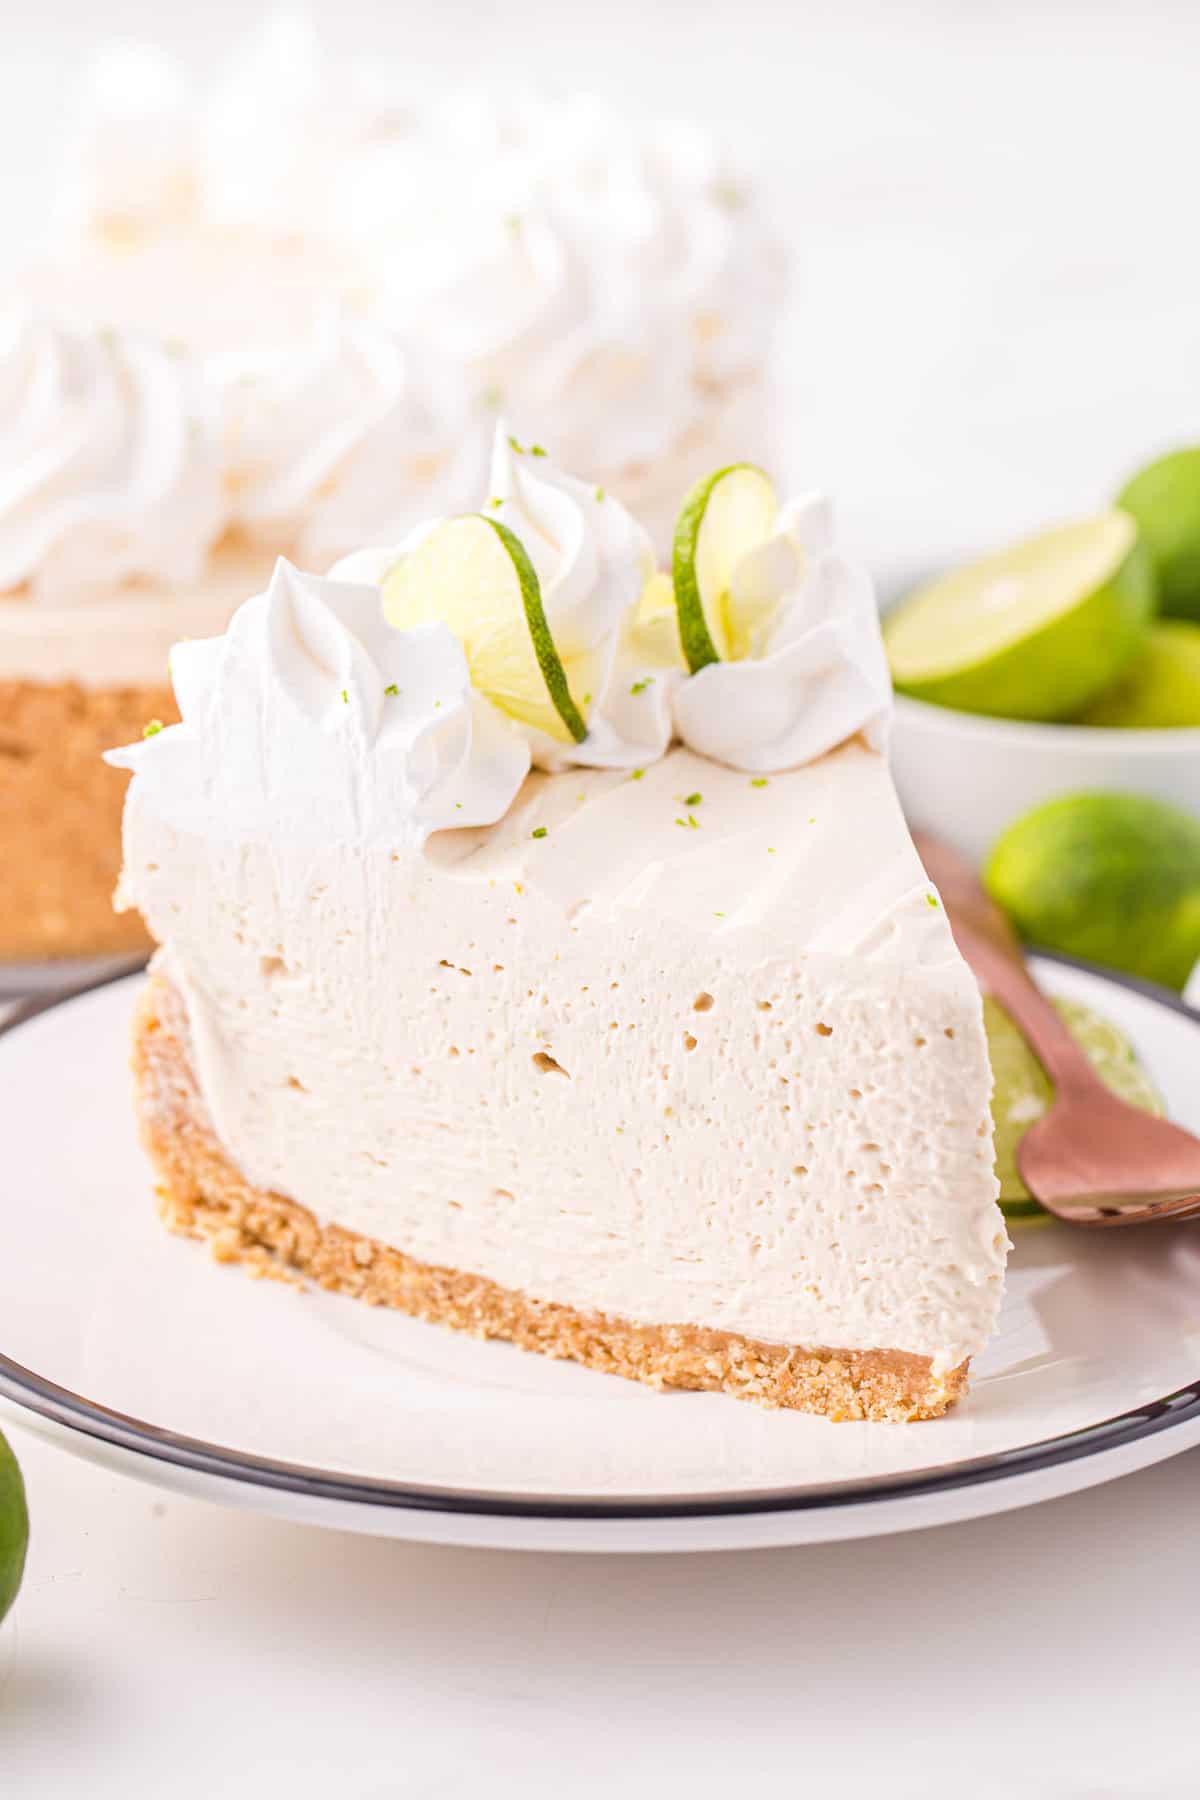 Slice of Keylime cheesecake on white plate